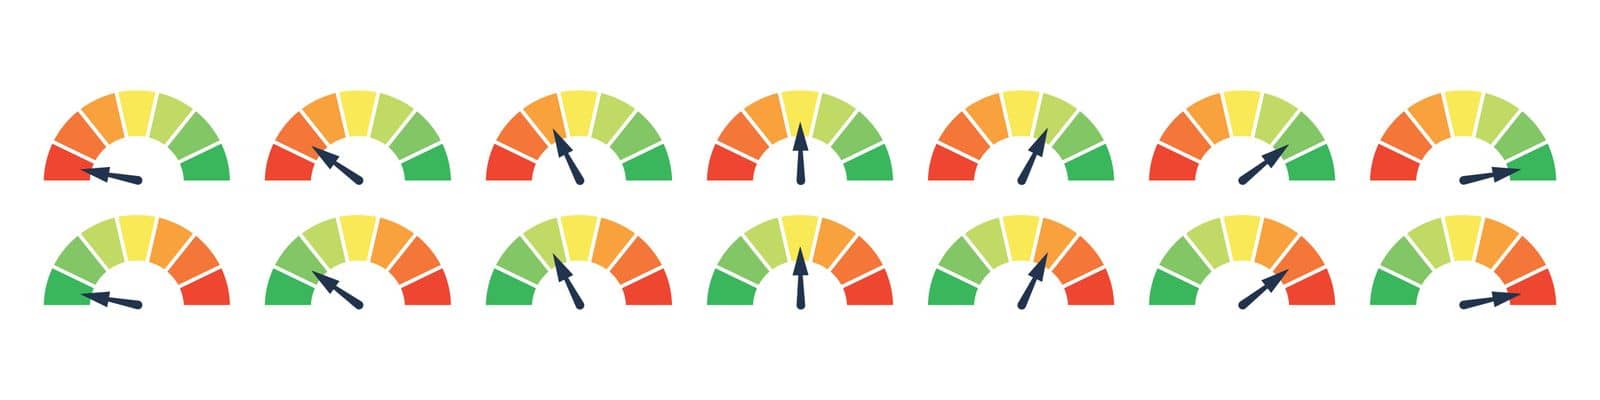 Set of different colorful speedometers, meter gauge element, ratings of varying degrees of satisfaction. Level indicator collection. Vector isolated illustration by vikalost